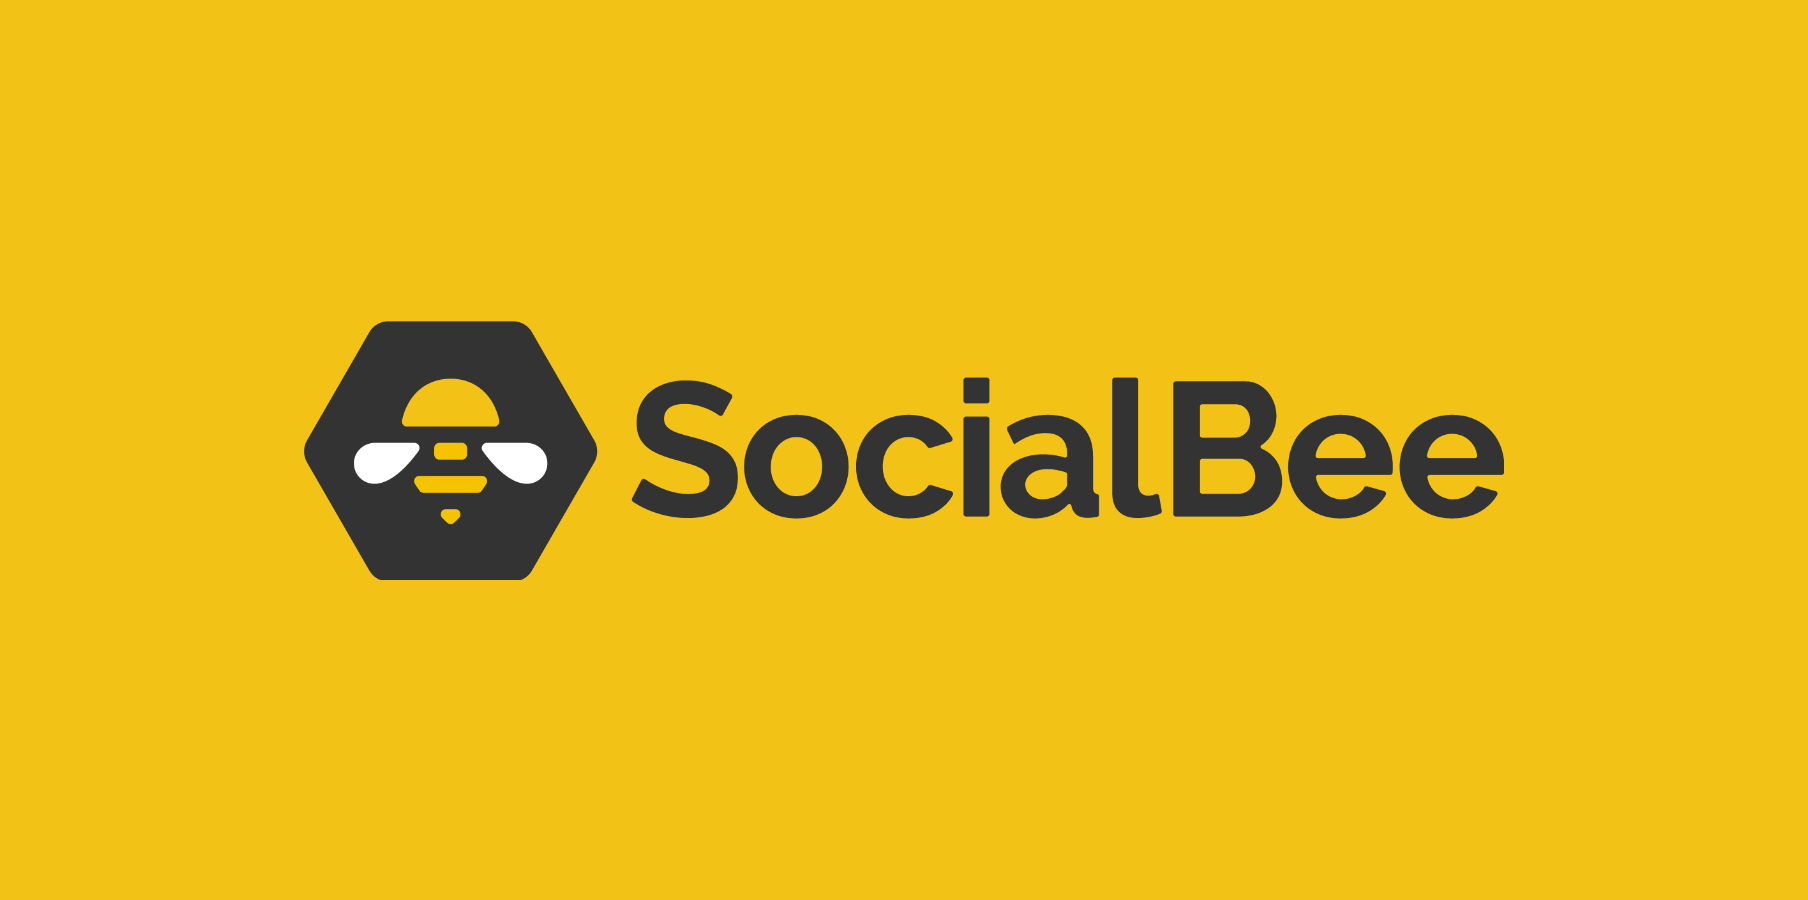 SocialBee is an AI-powered social media management platform that allows users to create, schedule and publish content across all major platforms.